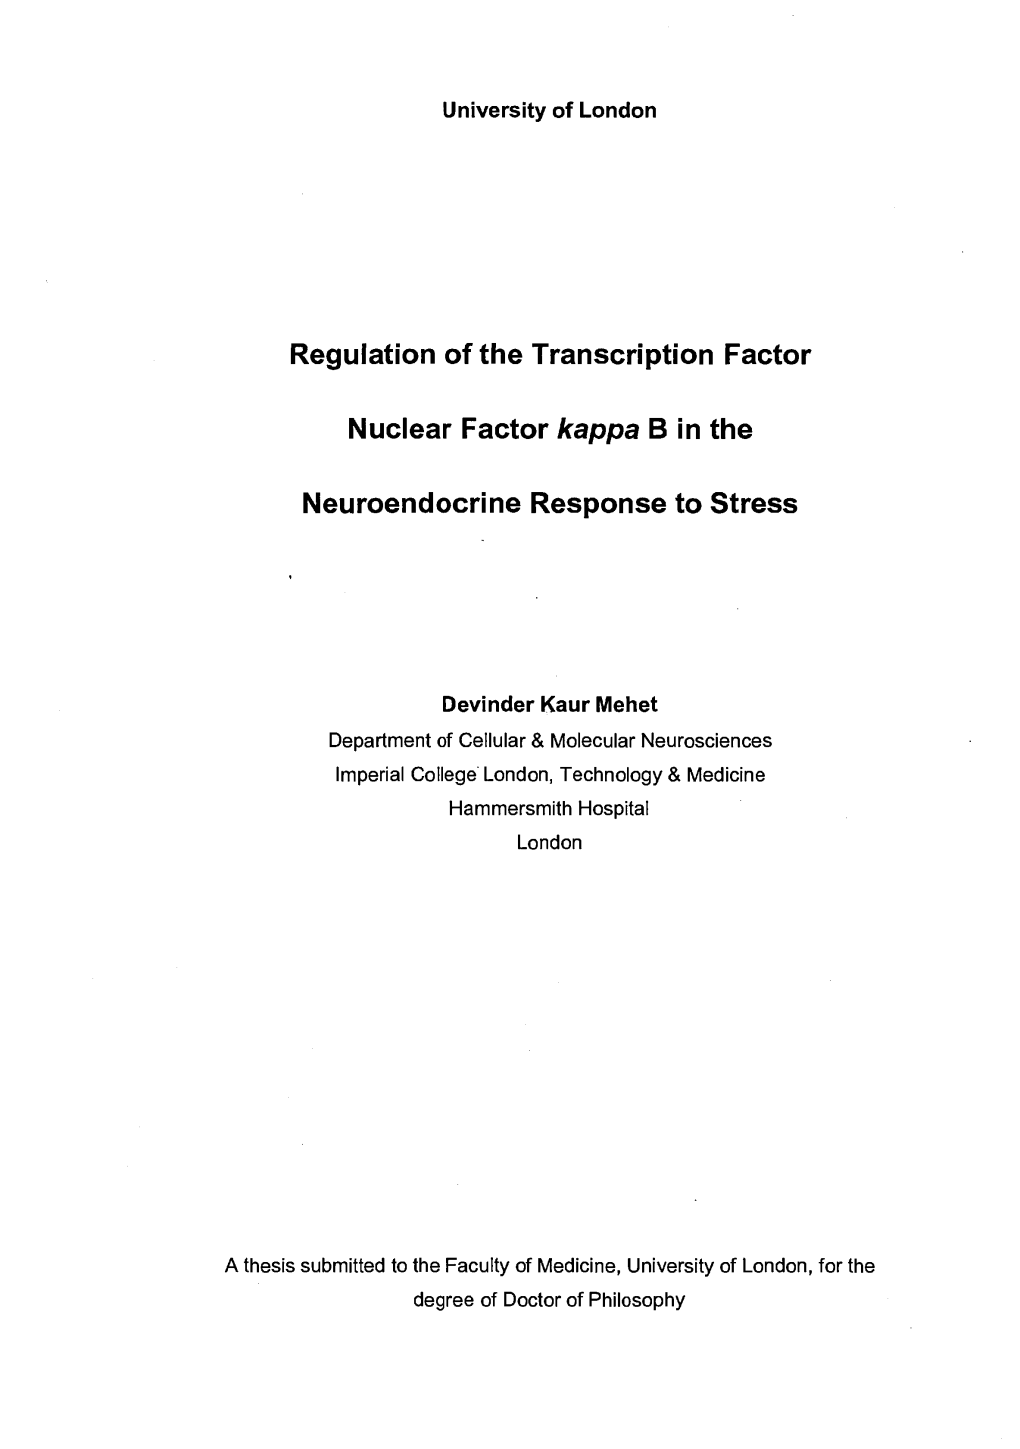 Regulation of the Transcription Factor Nuclear Factor Kappa B in The